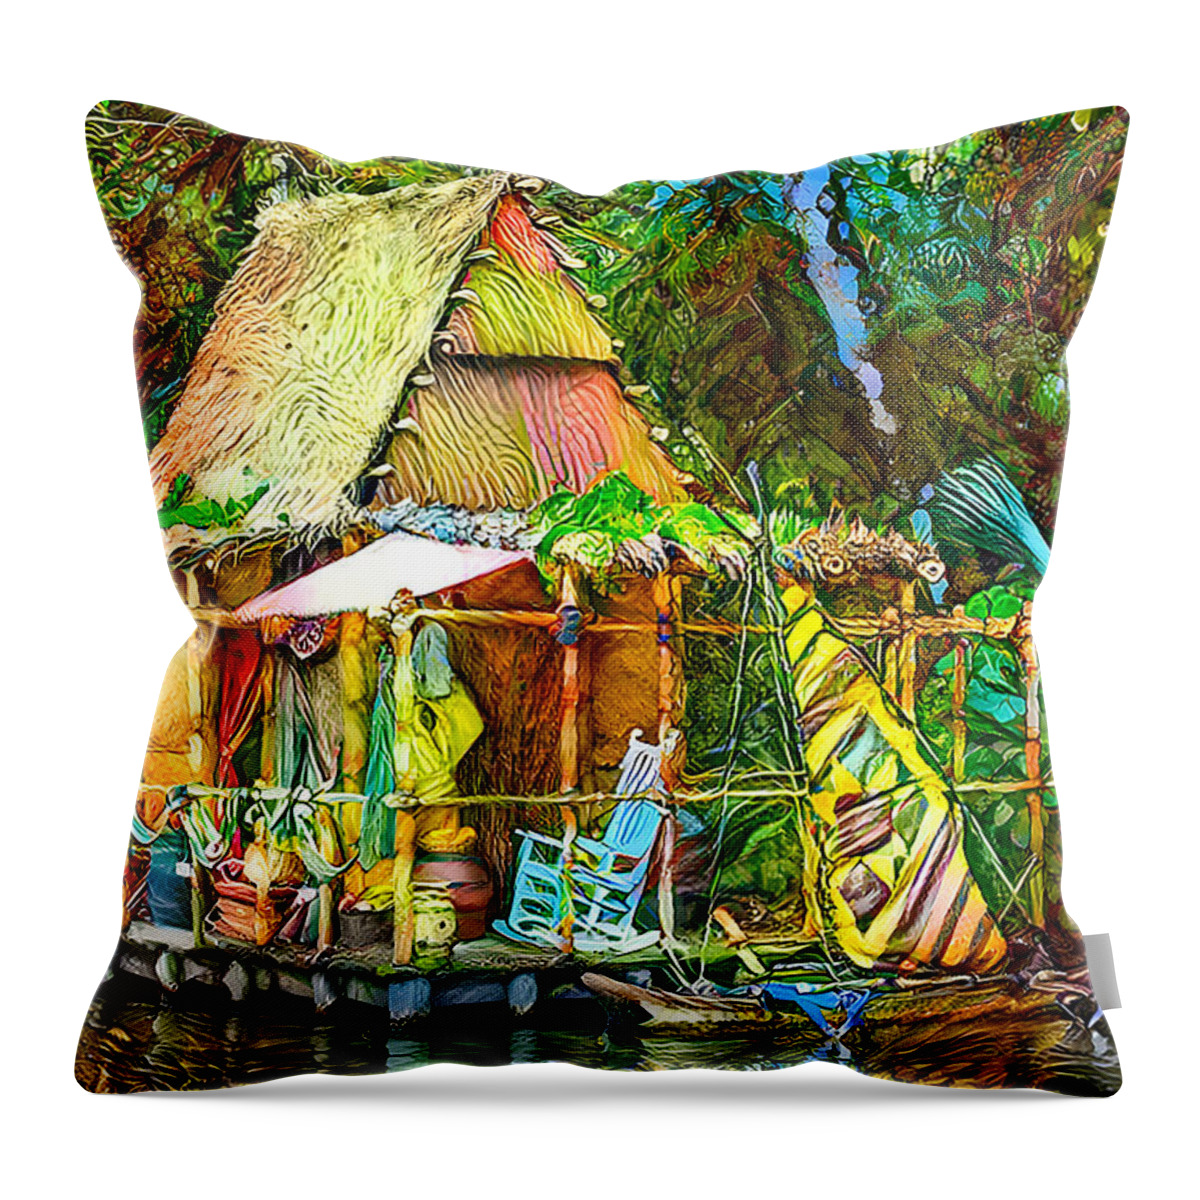 Cabin Throw Pillow featuring the mixed media Colorful Tropical Cabin by Debra Kewley